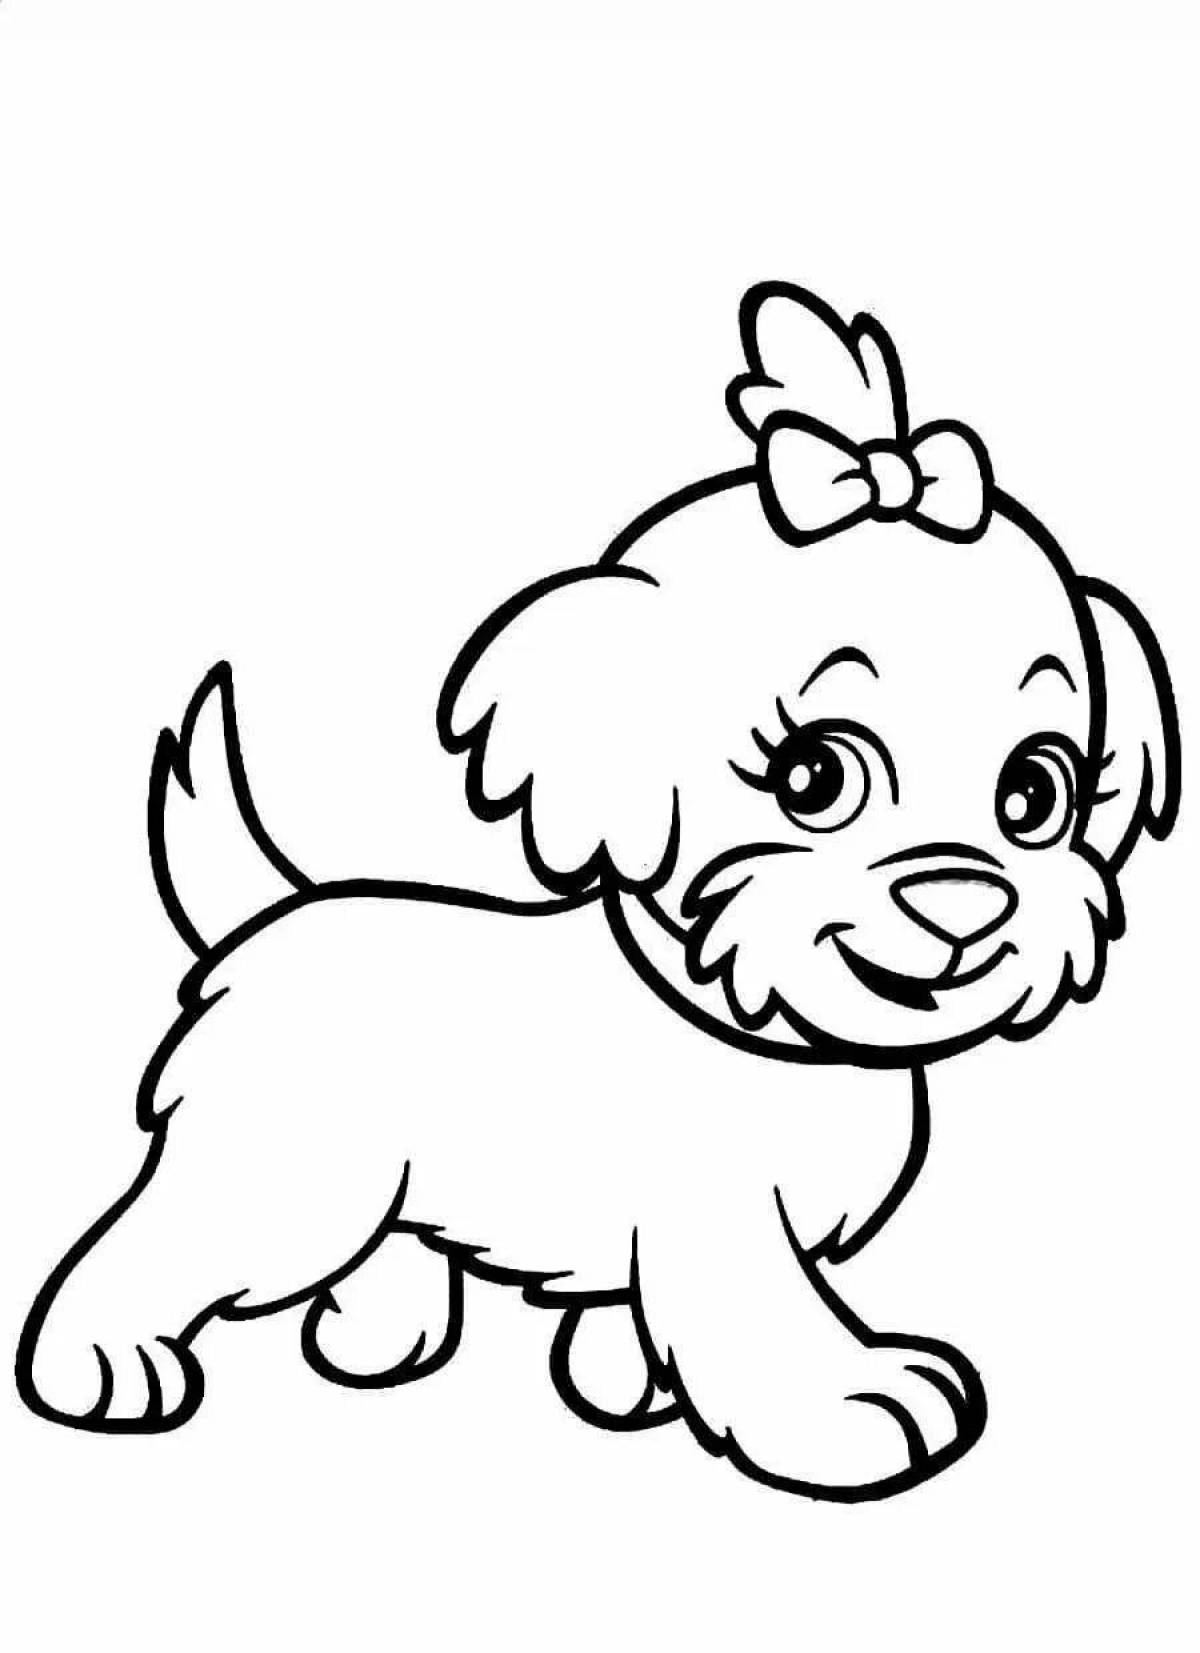 Animated dog coloring book for children 4-5 years old